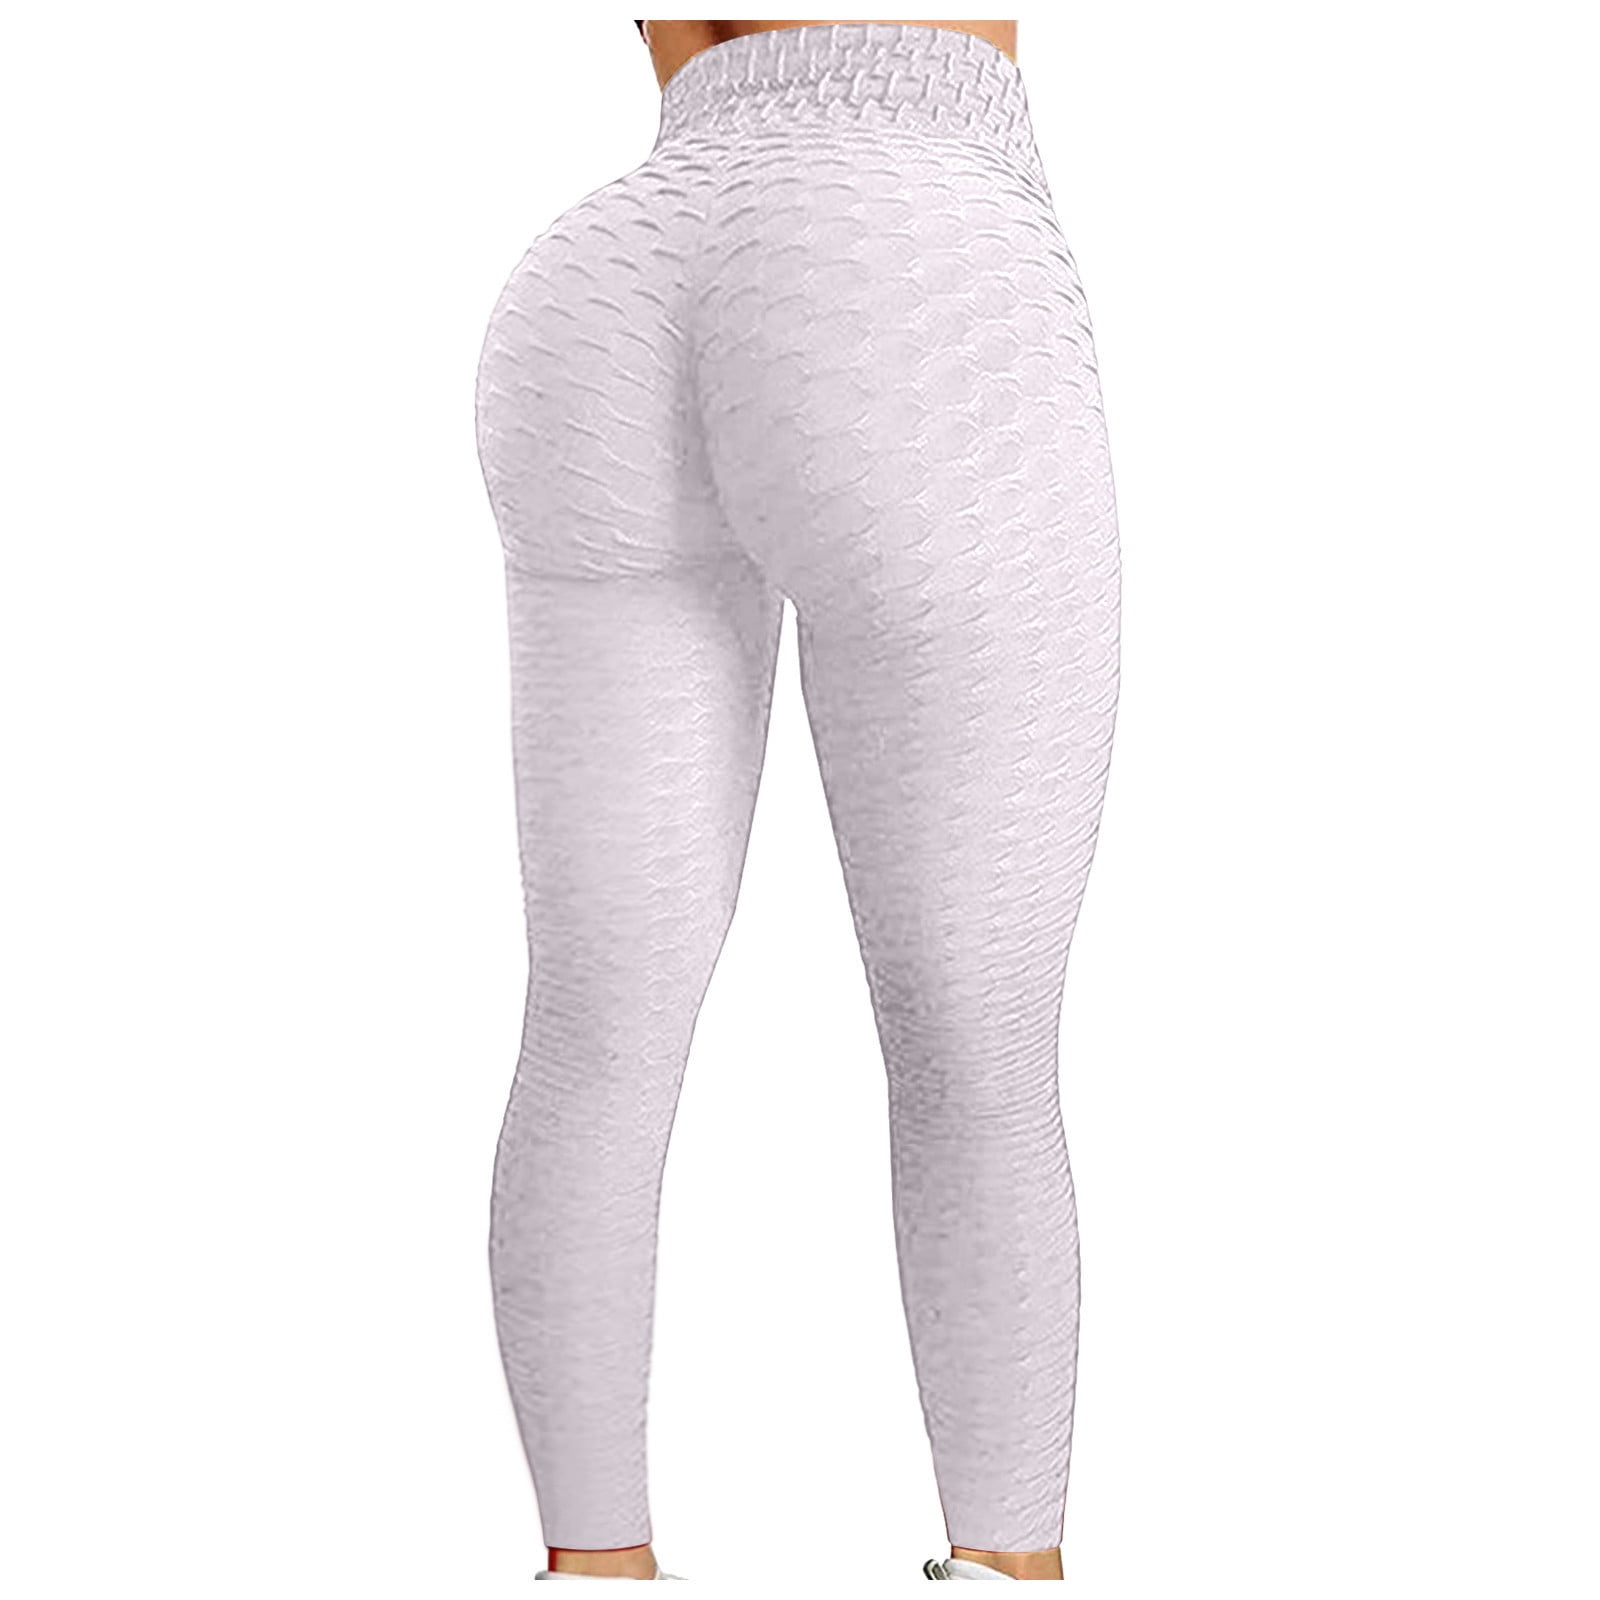 RQYYD Plus Size Women's Jean Leggings,High Waisted Fitness Running